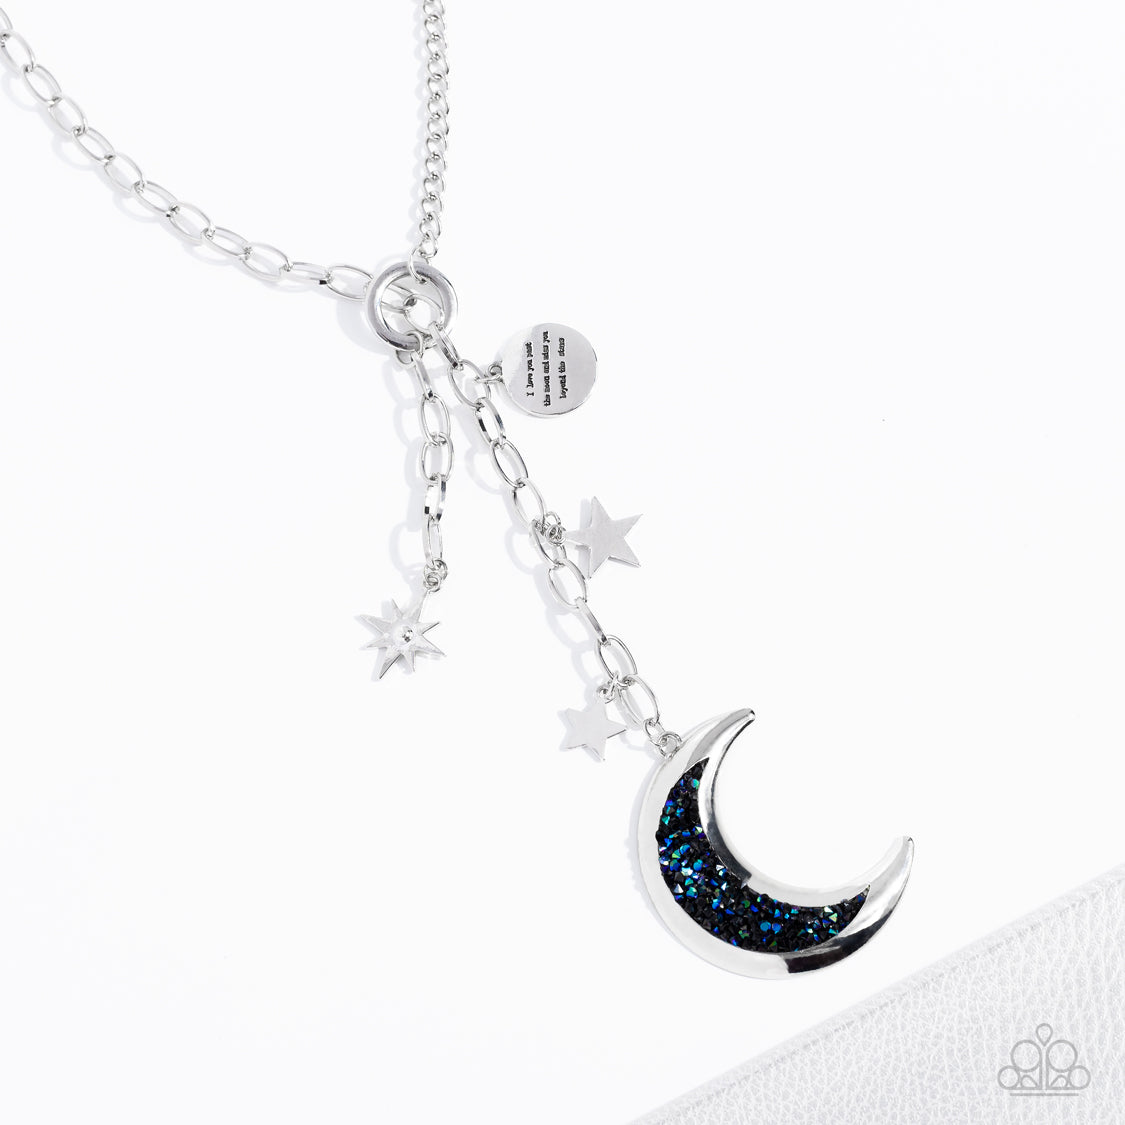 Once in a Blue Moon - Multi Necklace - Paparazzi Accessories